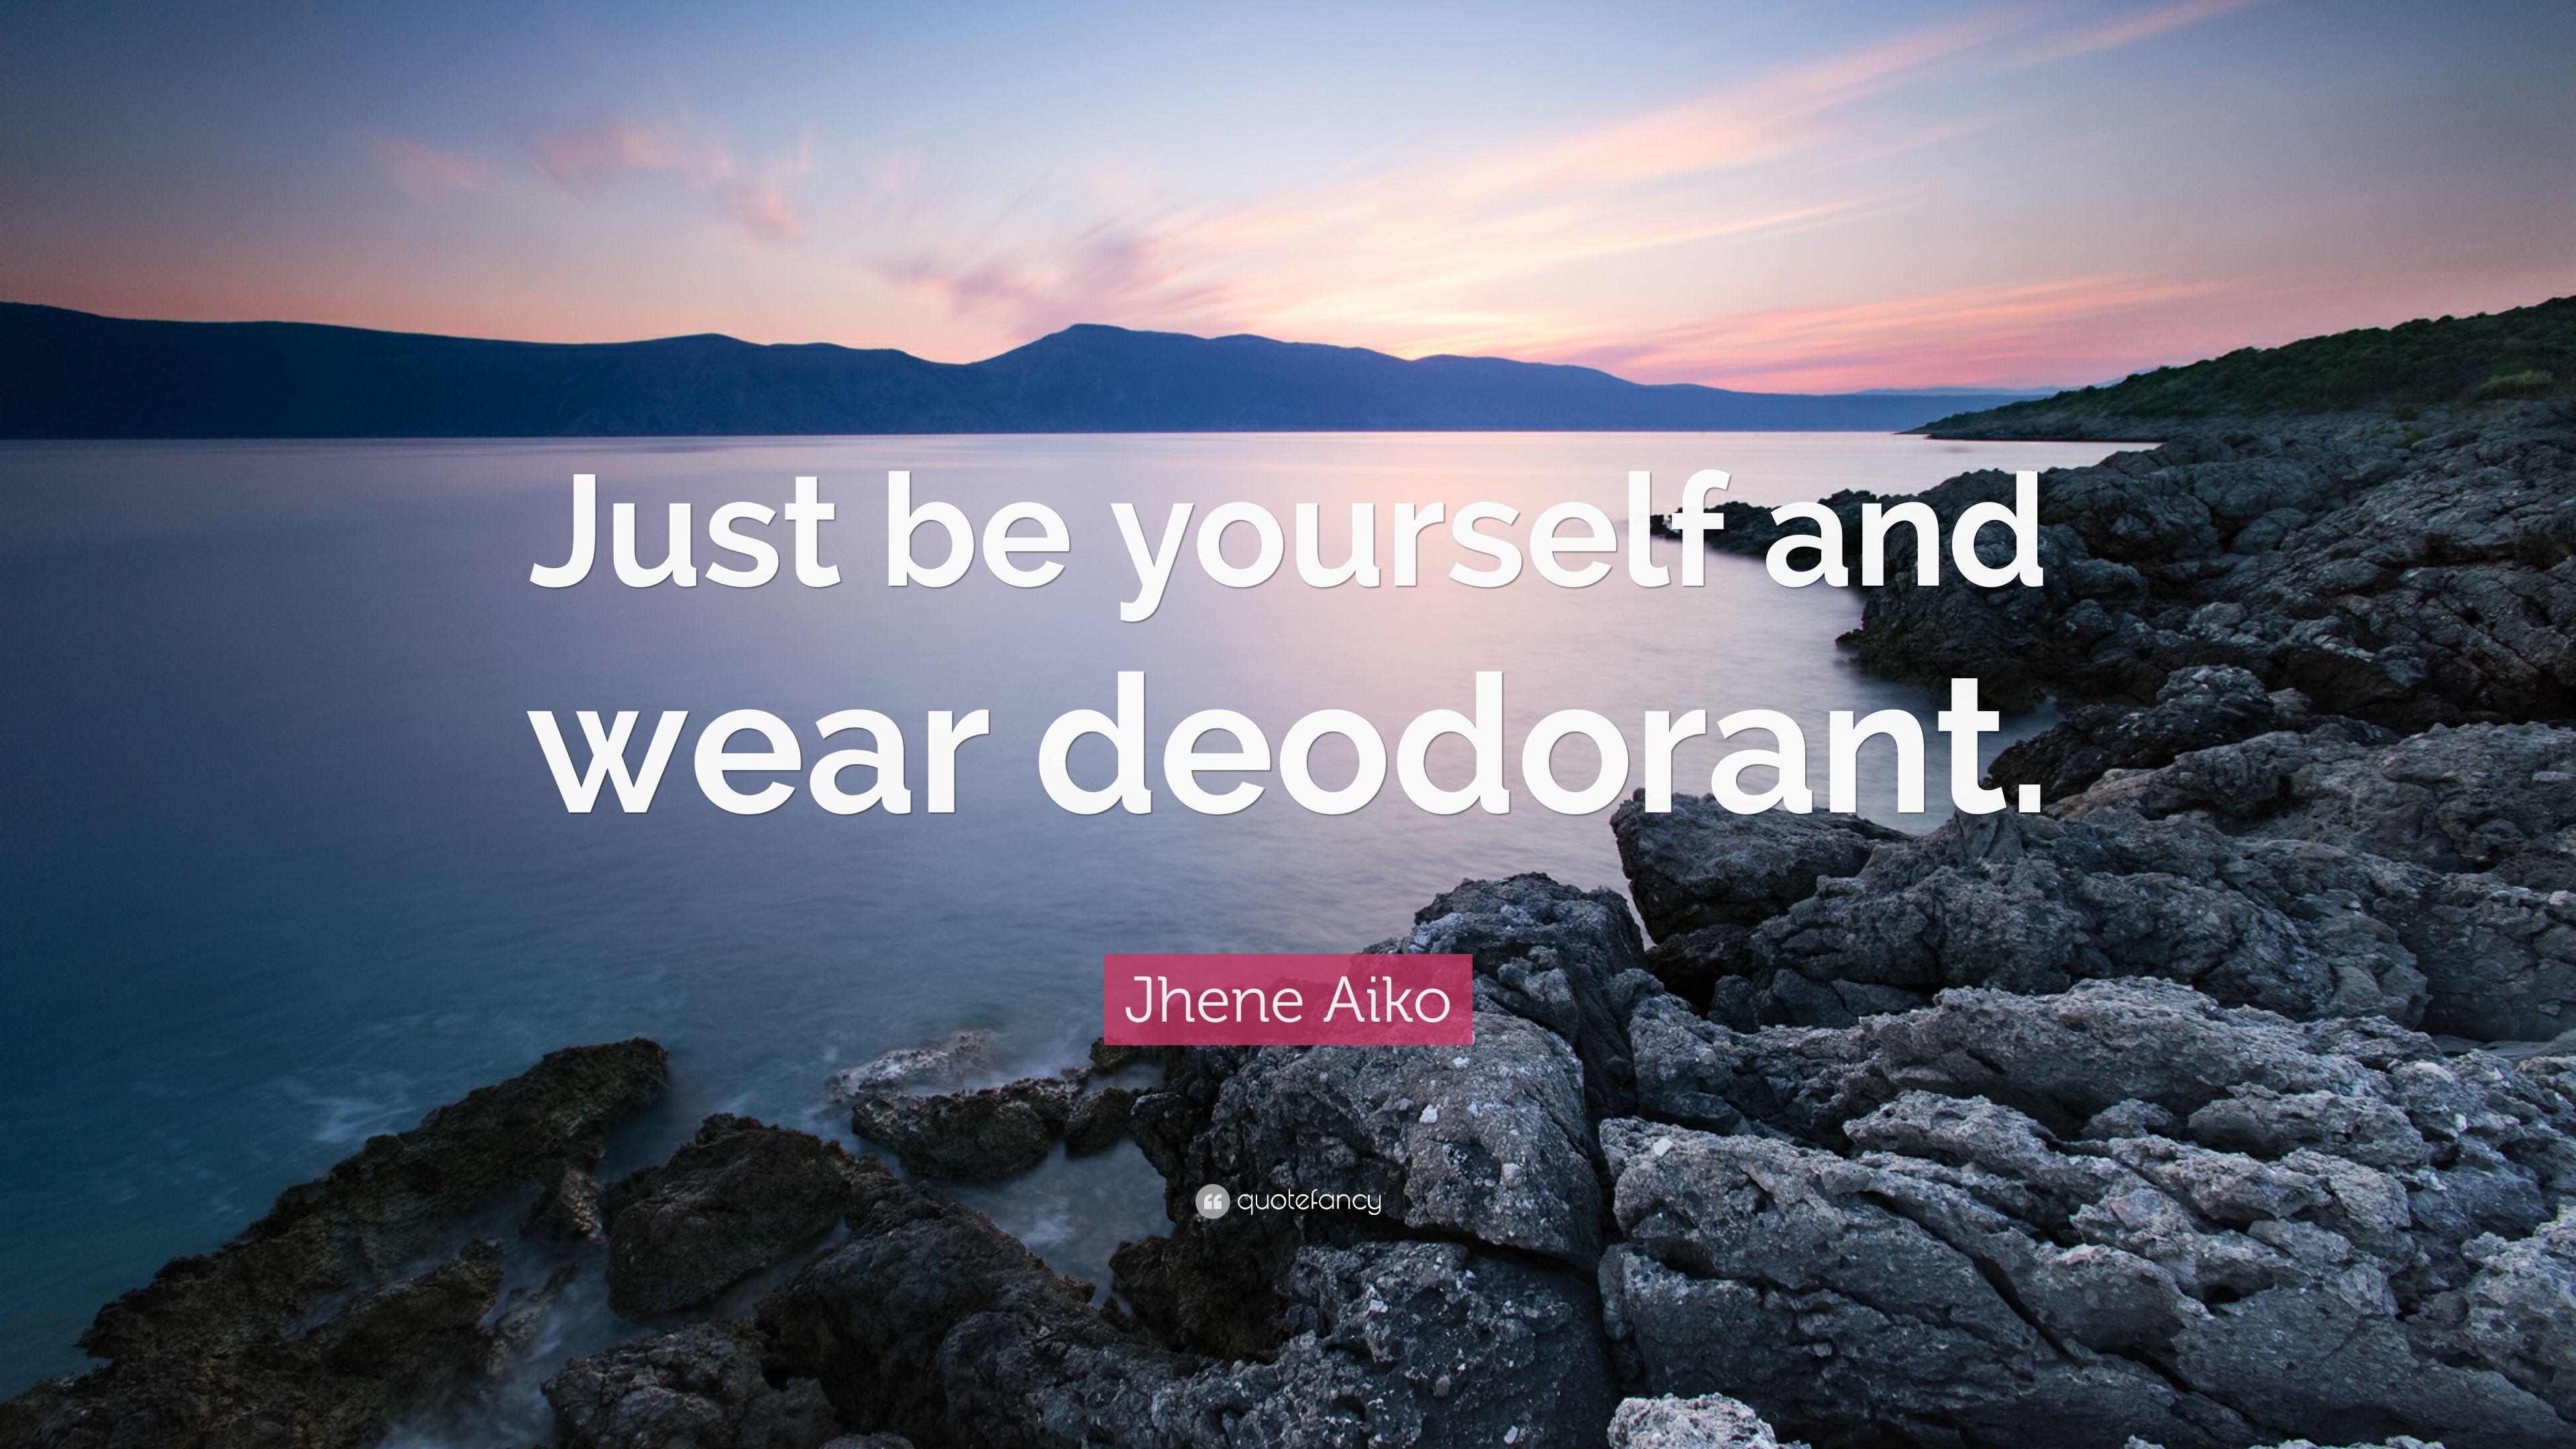 Jhene Aiko Quote: “Just be yourself and wear deodorant.” 10